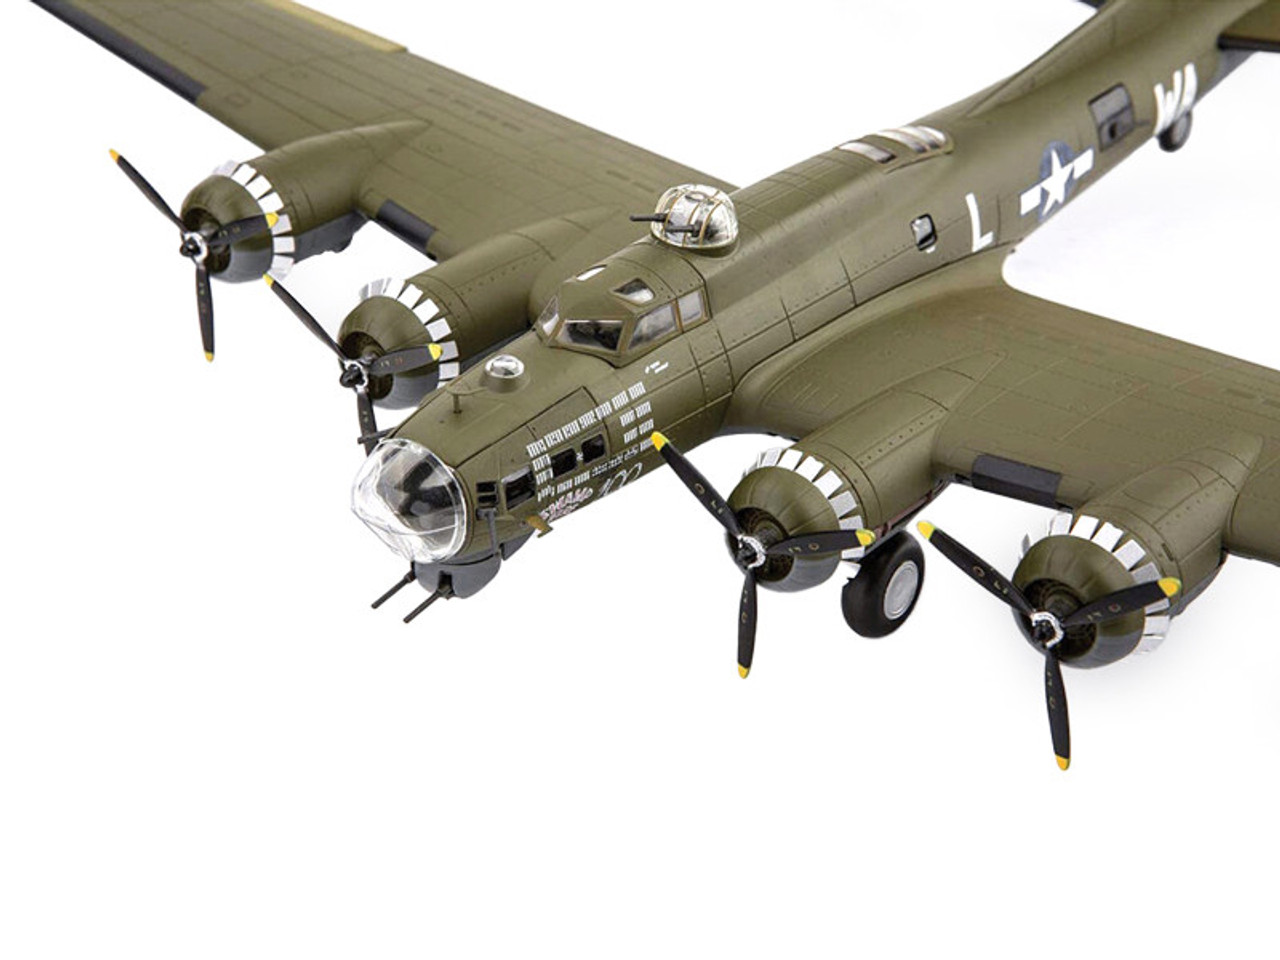 Boeing B-17G Flying Fortress Bomber Aircraft "Swamp Fire" "524th BS 379th BG" "Collector Series" 1/200 Diecast Model by Air Force 1